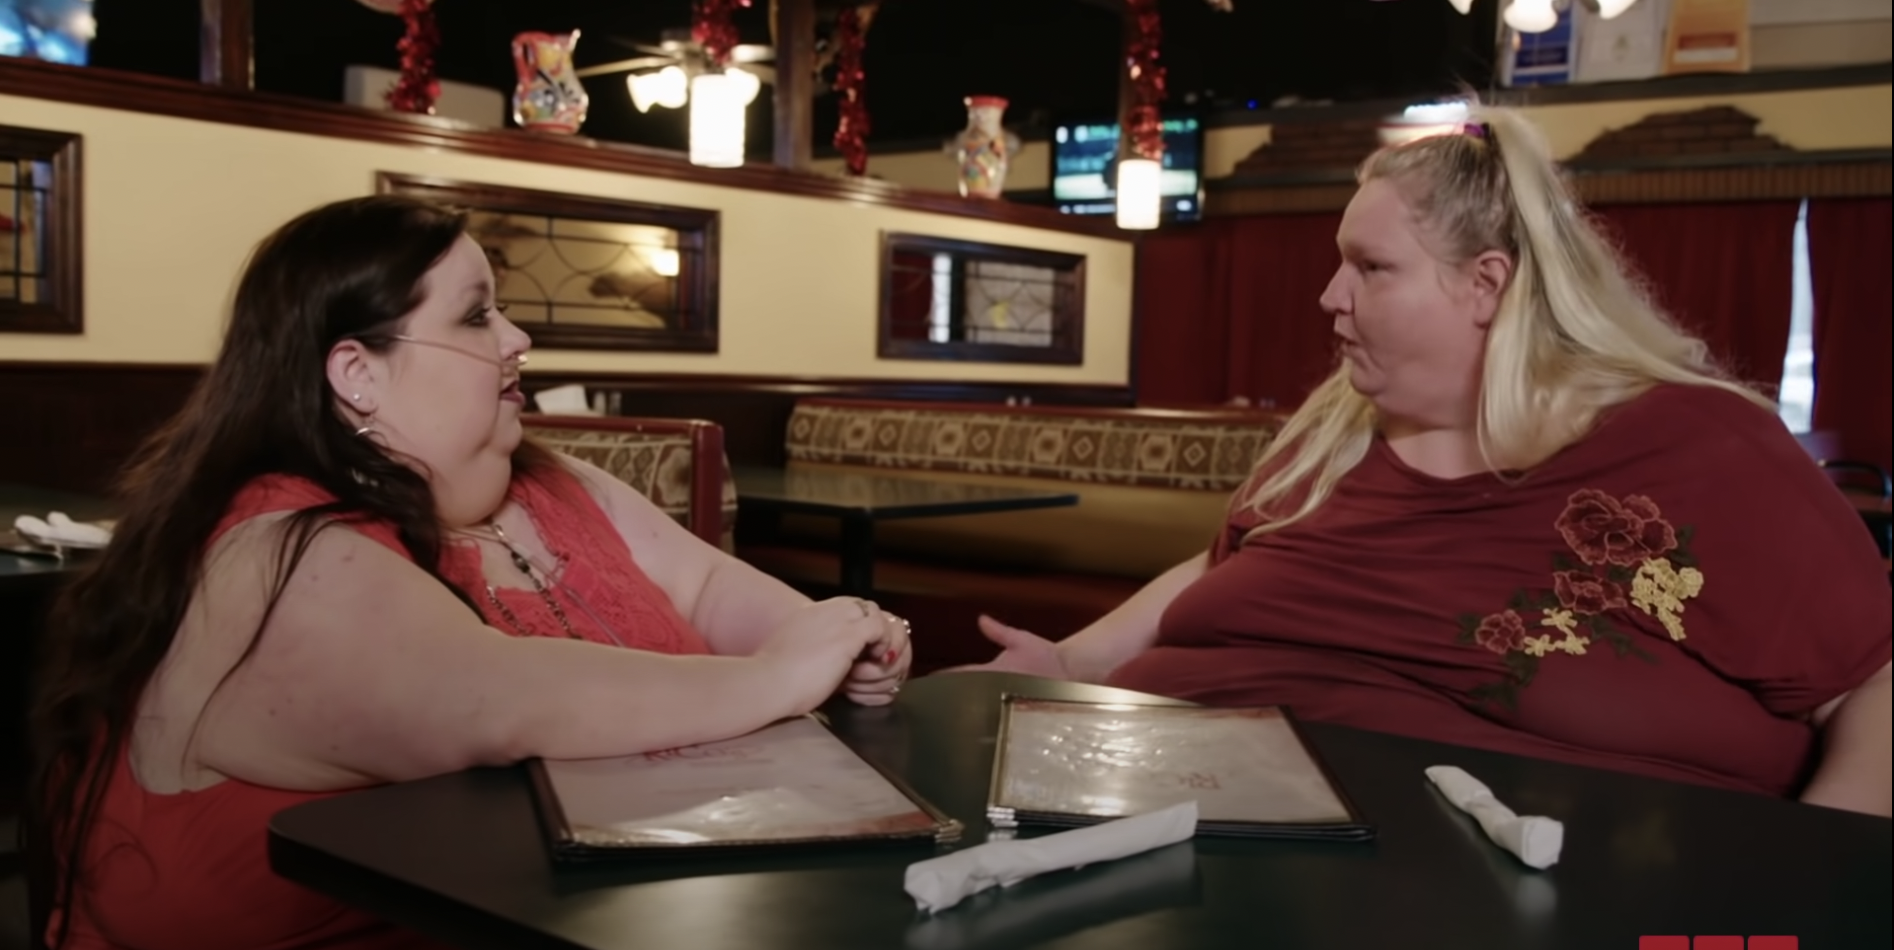 Meghan Crumpler and Vannessa Cross from '1000-lb Best Friends' talking to each other across a table